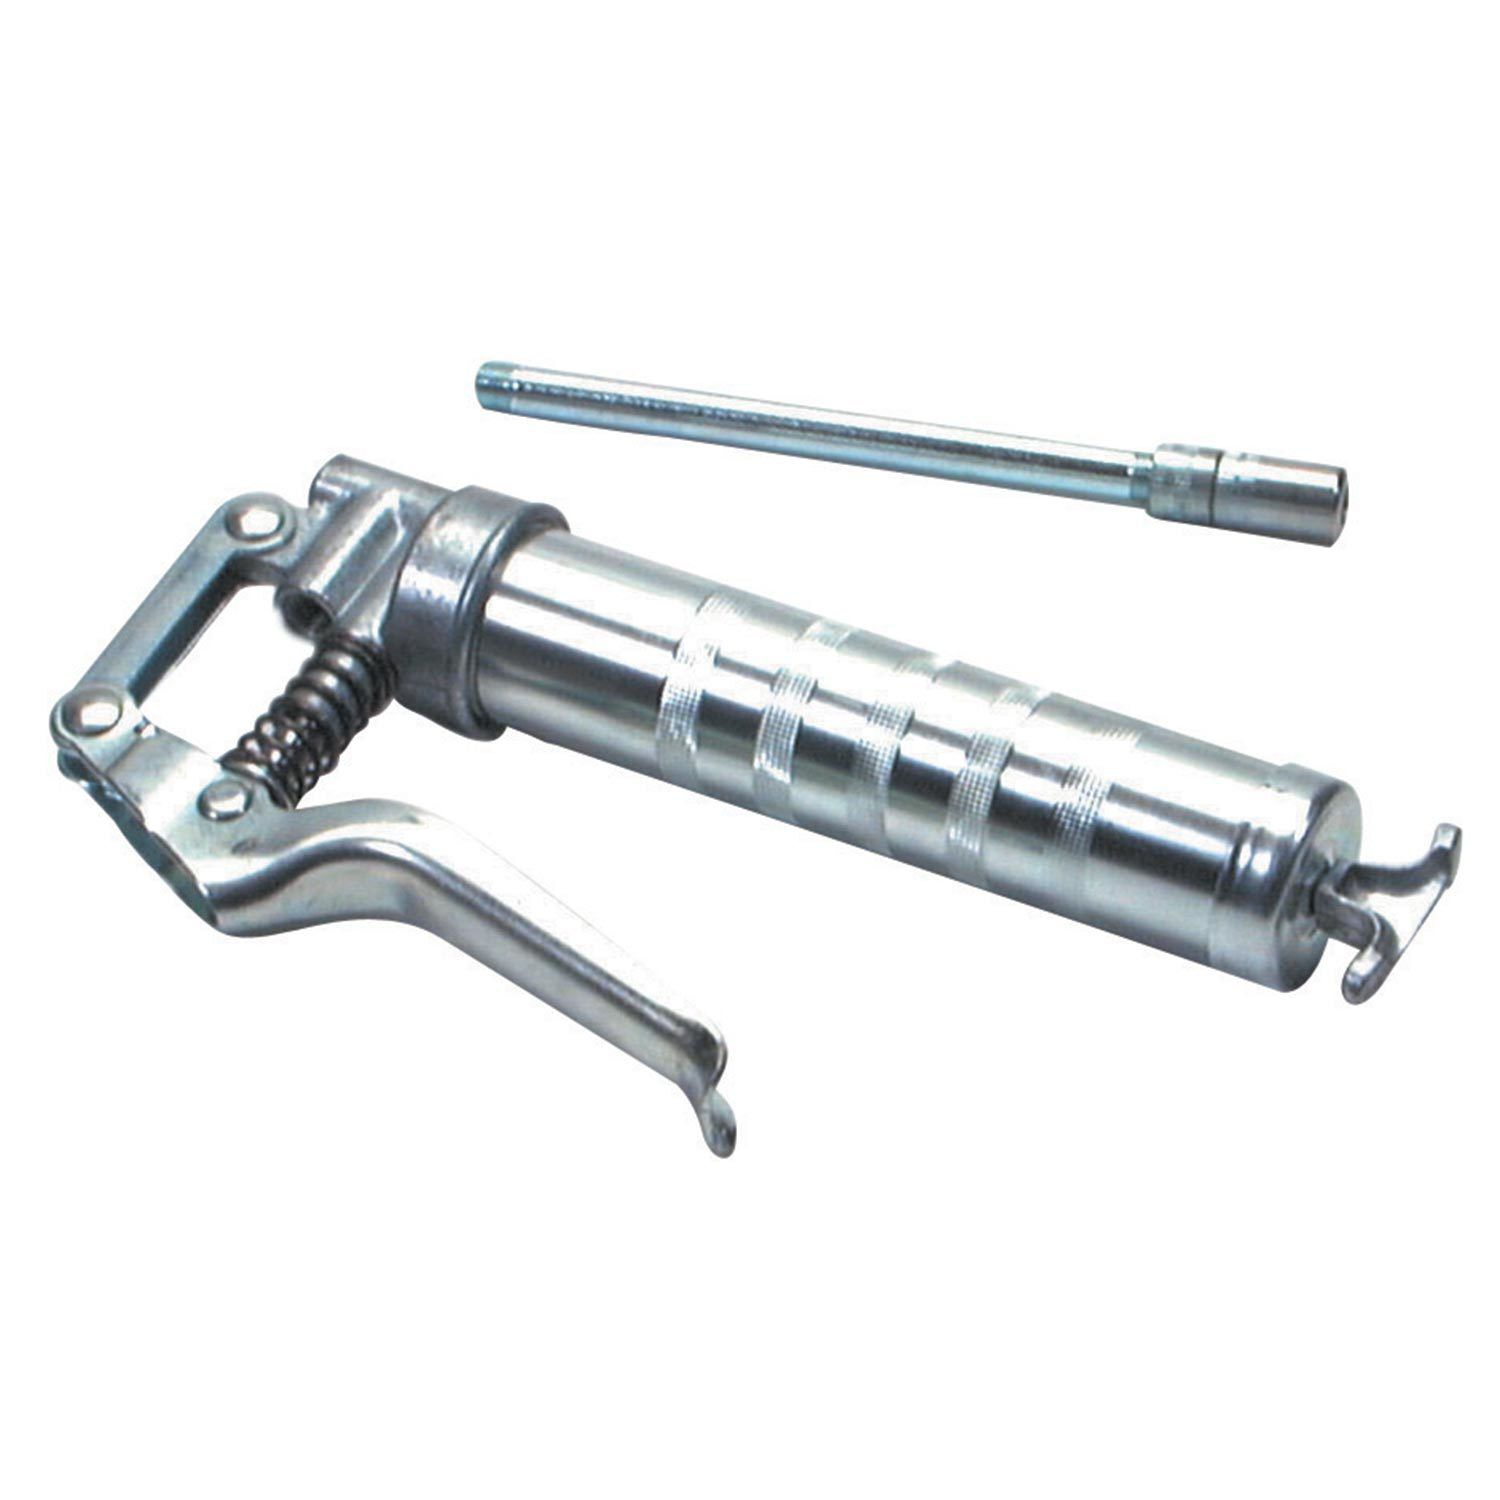 NEW AND FREE SHIPPING SMALL PORTABLE  PISTOL GRIP GREASE GUN 